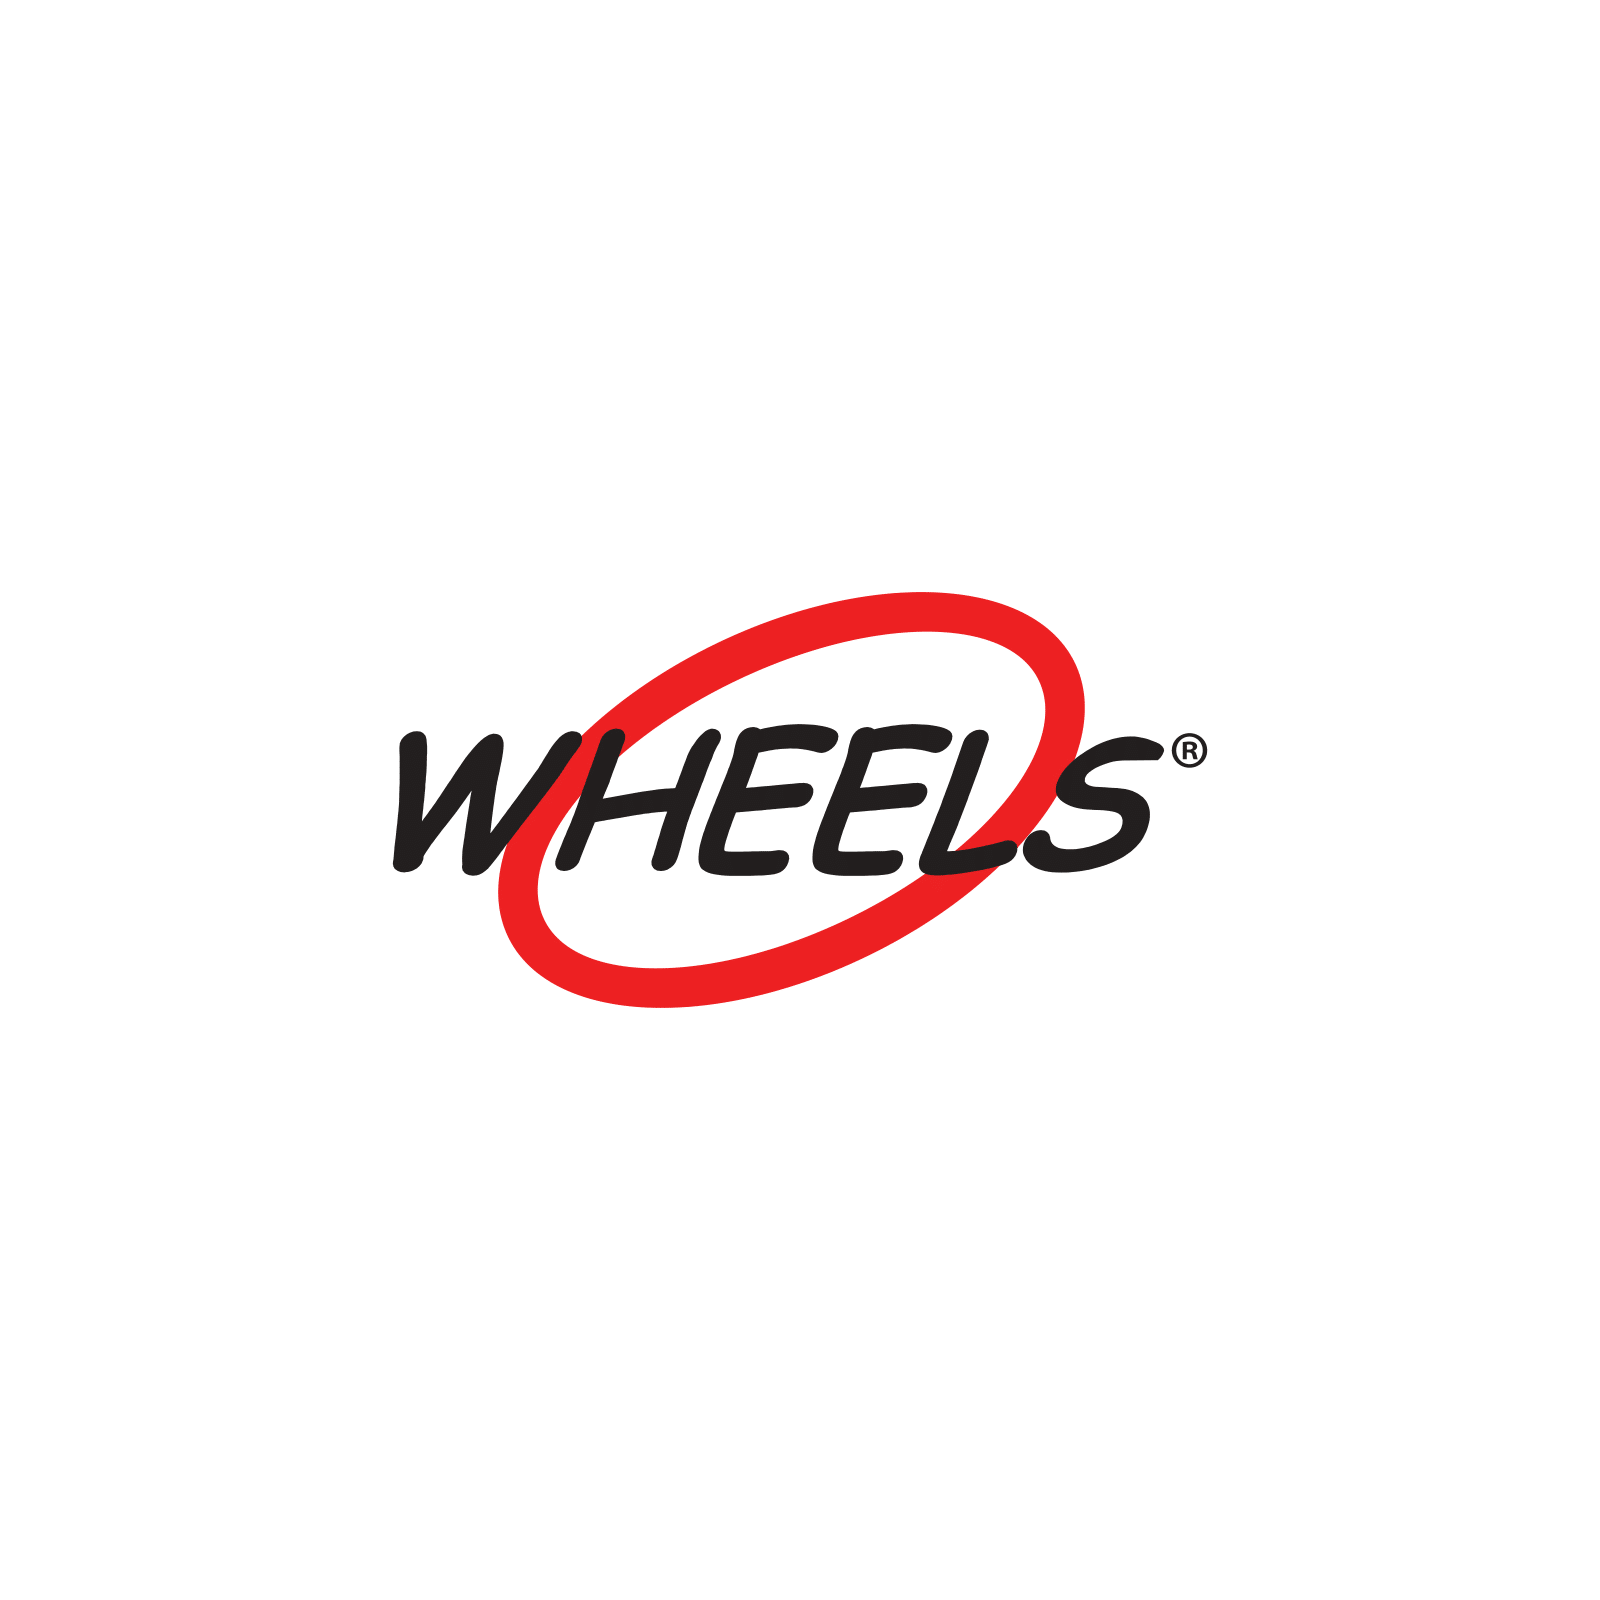 Wheels - New Milford, CT 06776 - (860)354-9209 | ShowMeLocal.com